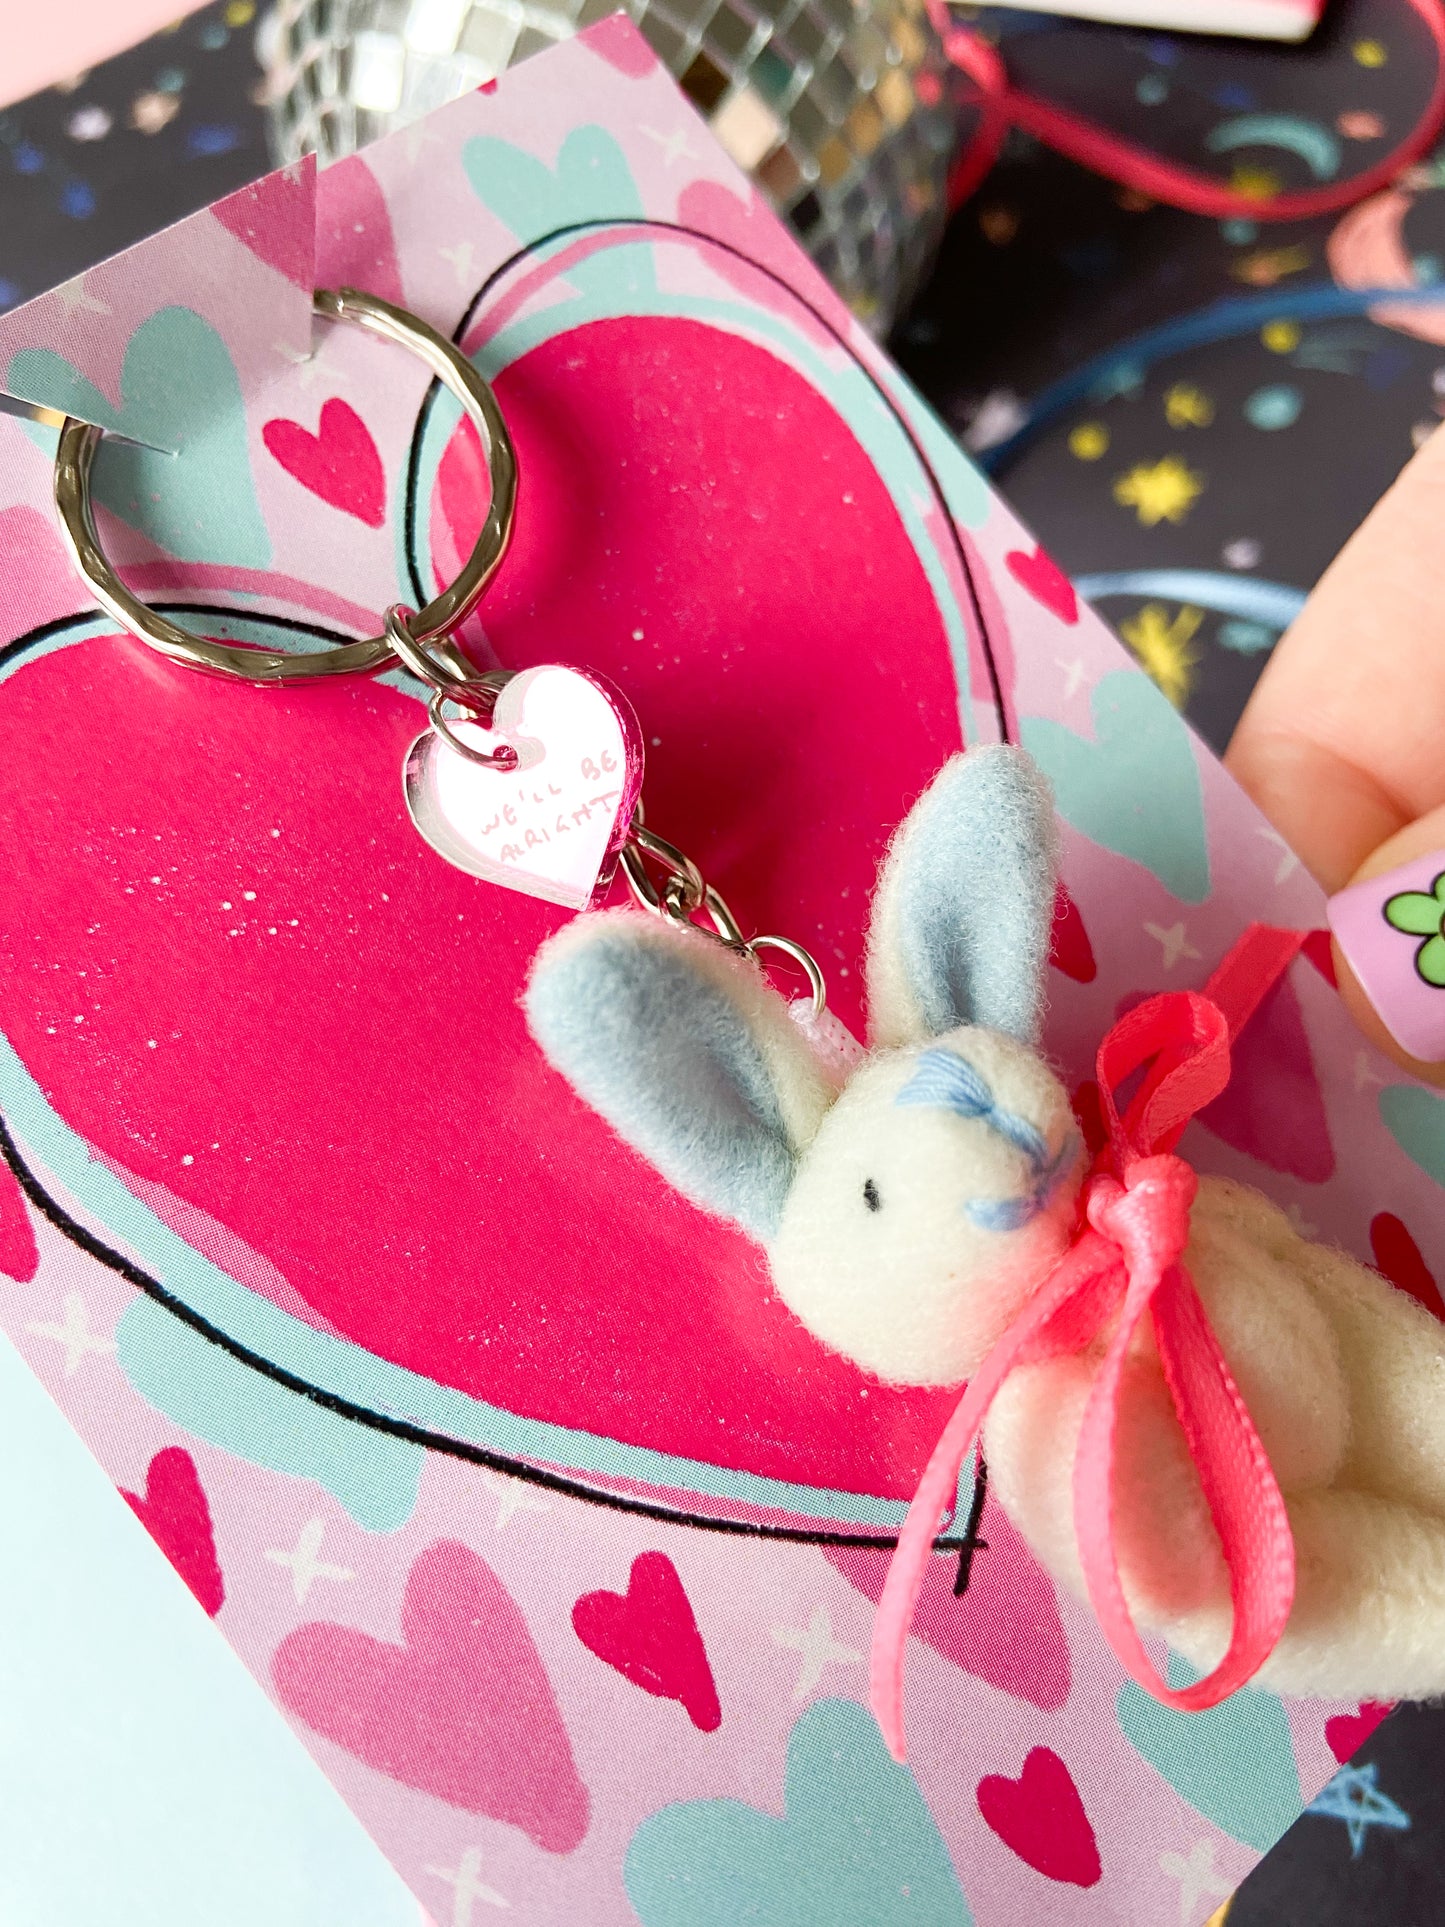 Pink and Blue Heart Friendship Bunnies Keychain, Harries Gift